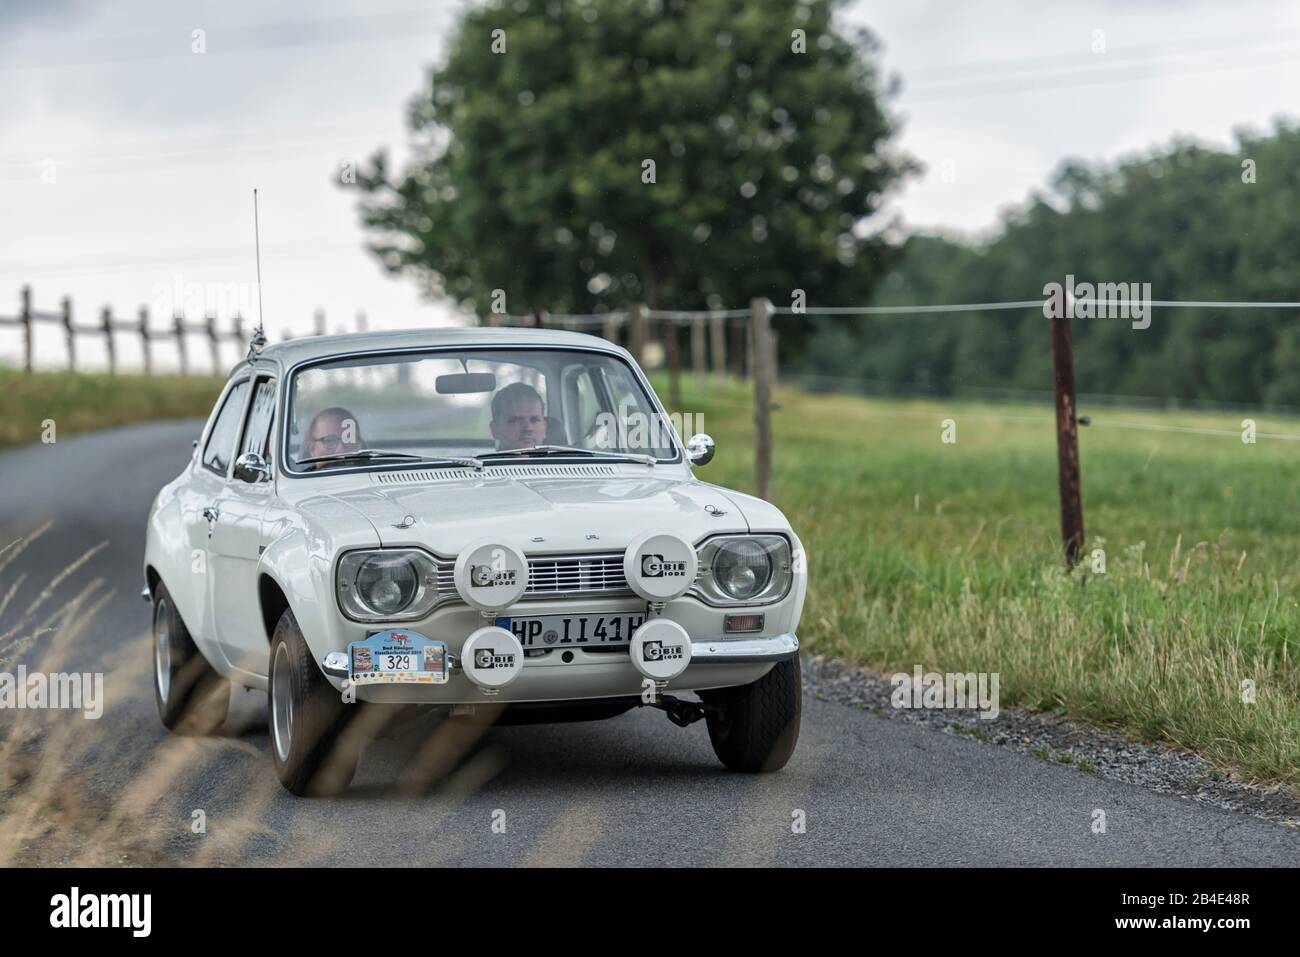 Bad König, Hesse, Germany, Ford Escort MK1 RS 1600 BDA, built in 1972, built in 1972, 1600 cc, 215 hp at the classic festival. Stock Photo